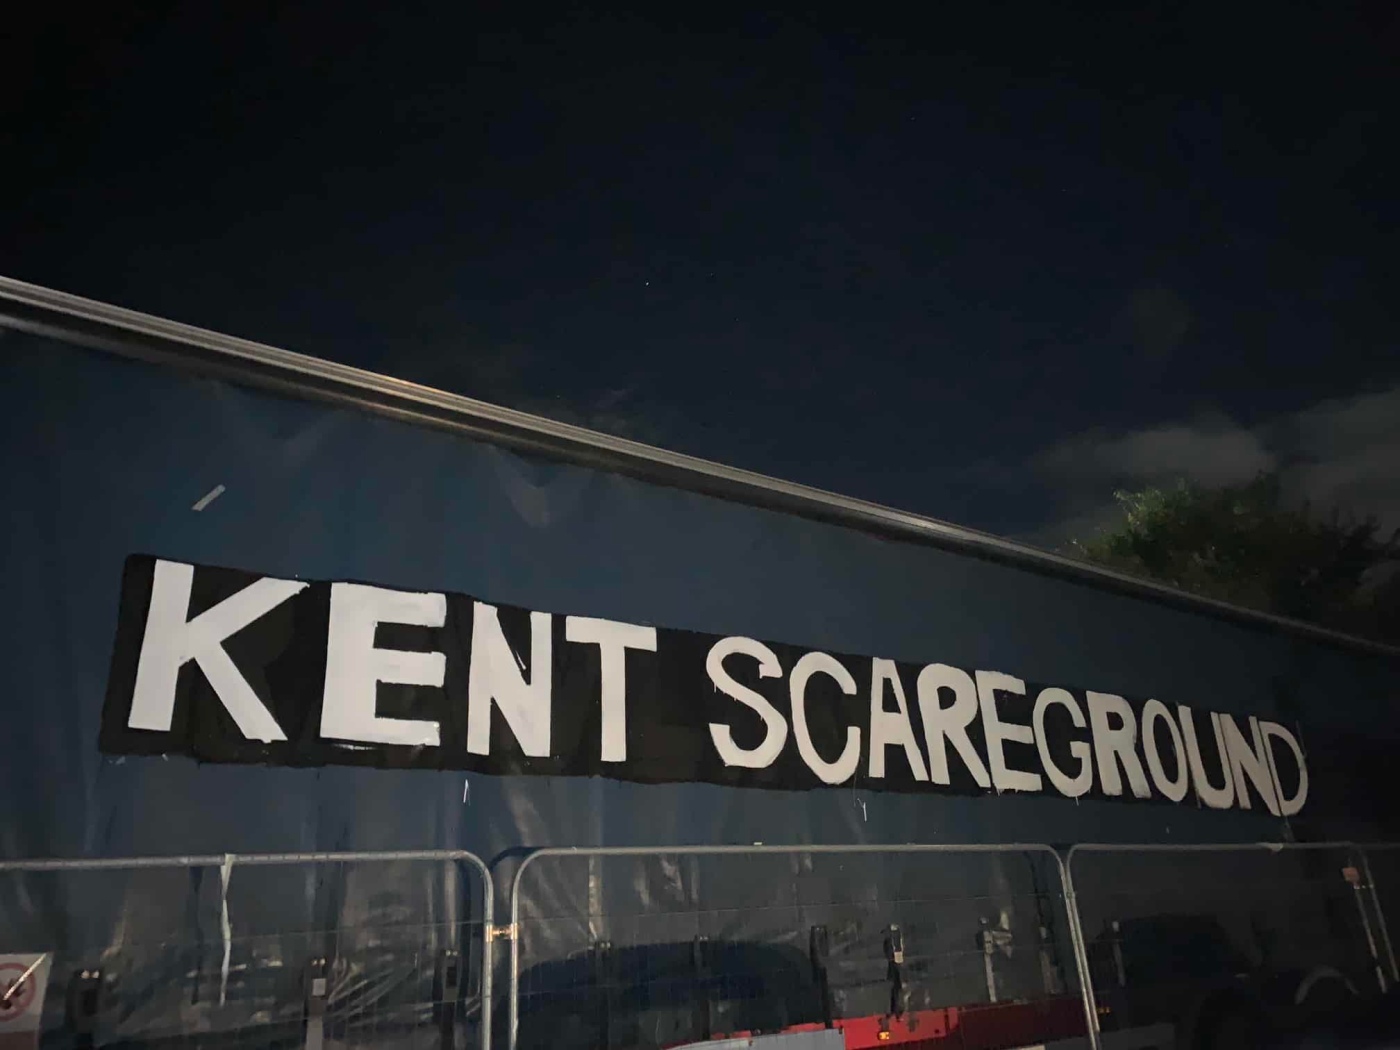 Kent Scareground sign on the back of a lorry trailer.